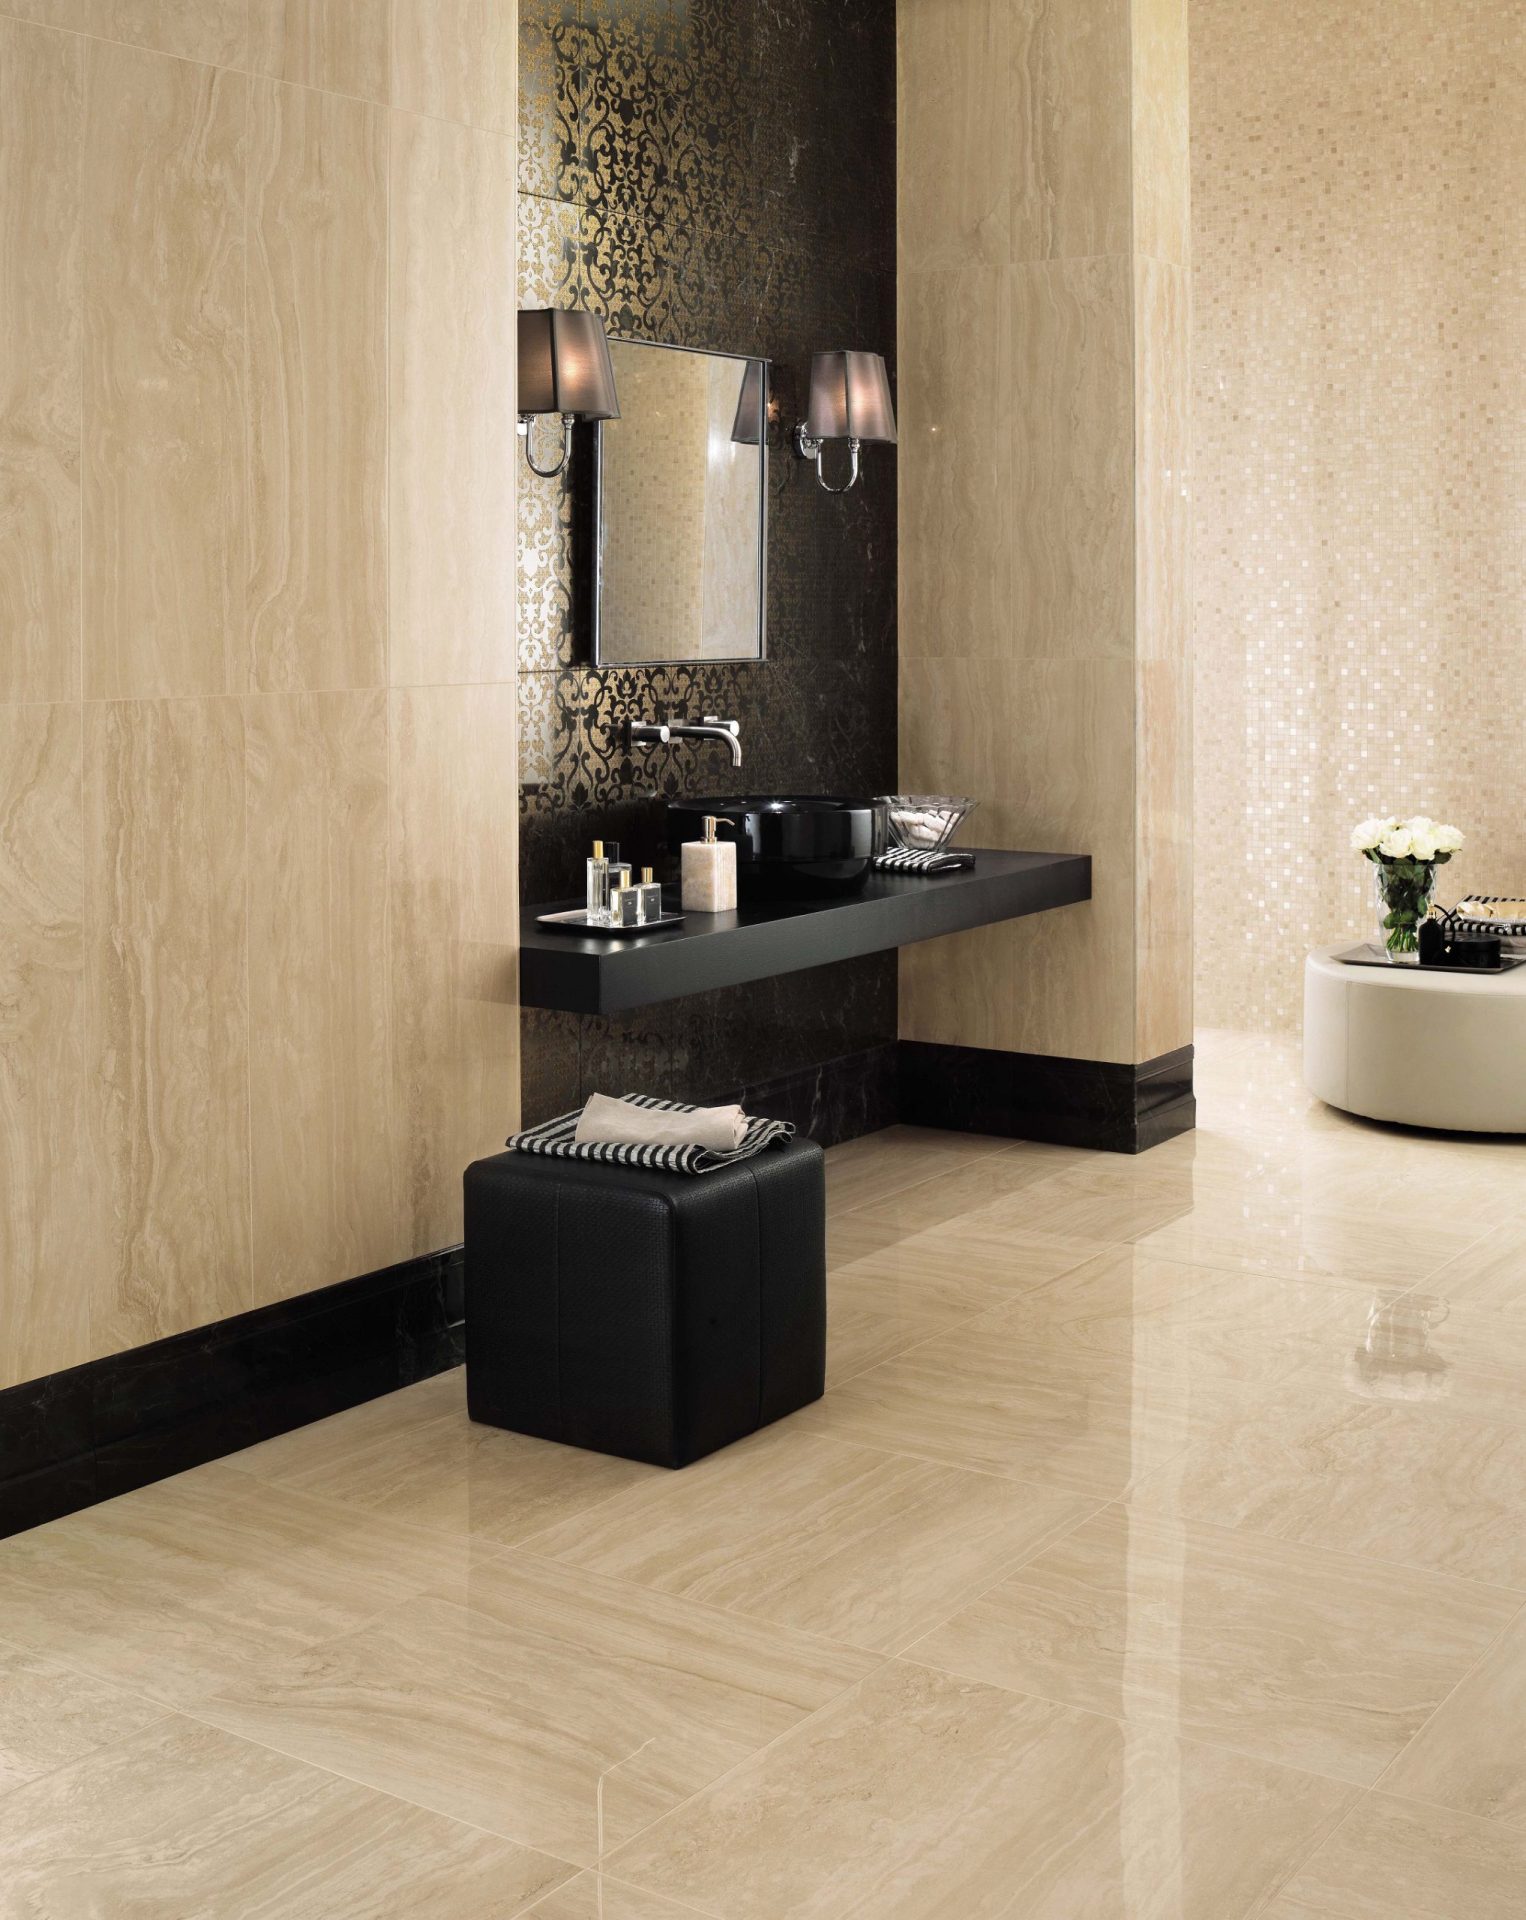 Marvel Pro Travertion Alabastrino tile installed on floors and walls in bathroom next to sink